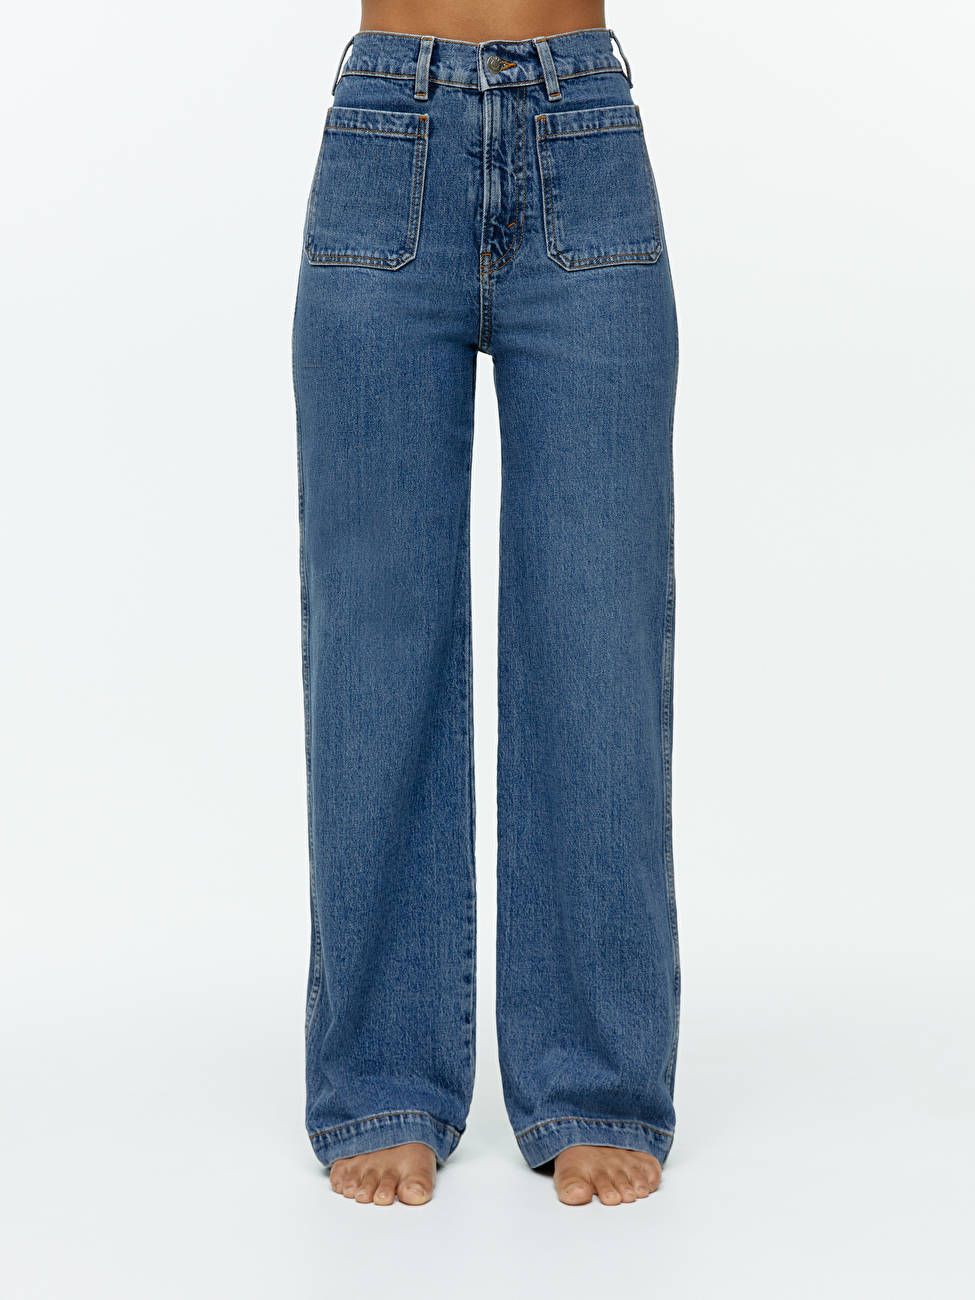 LUPINE High Flared Stretch Jeans | ARKET (US&UK)